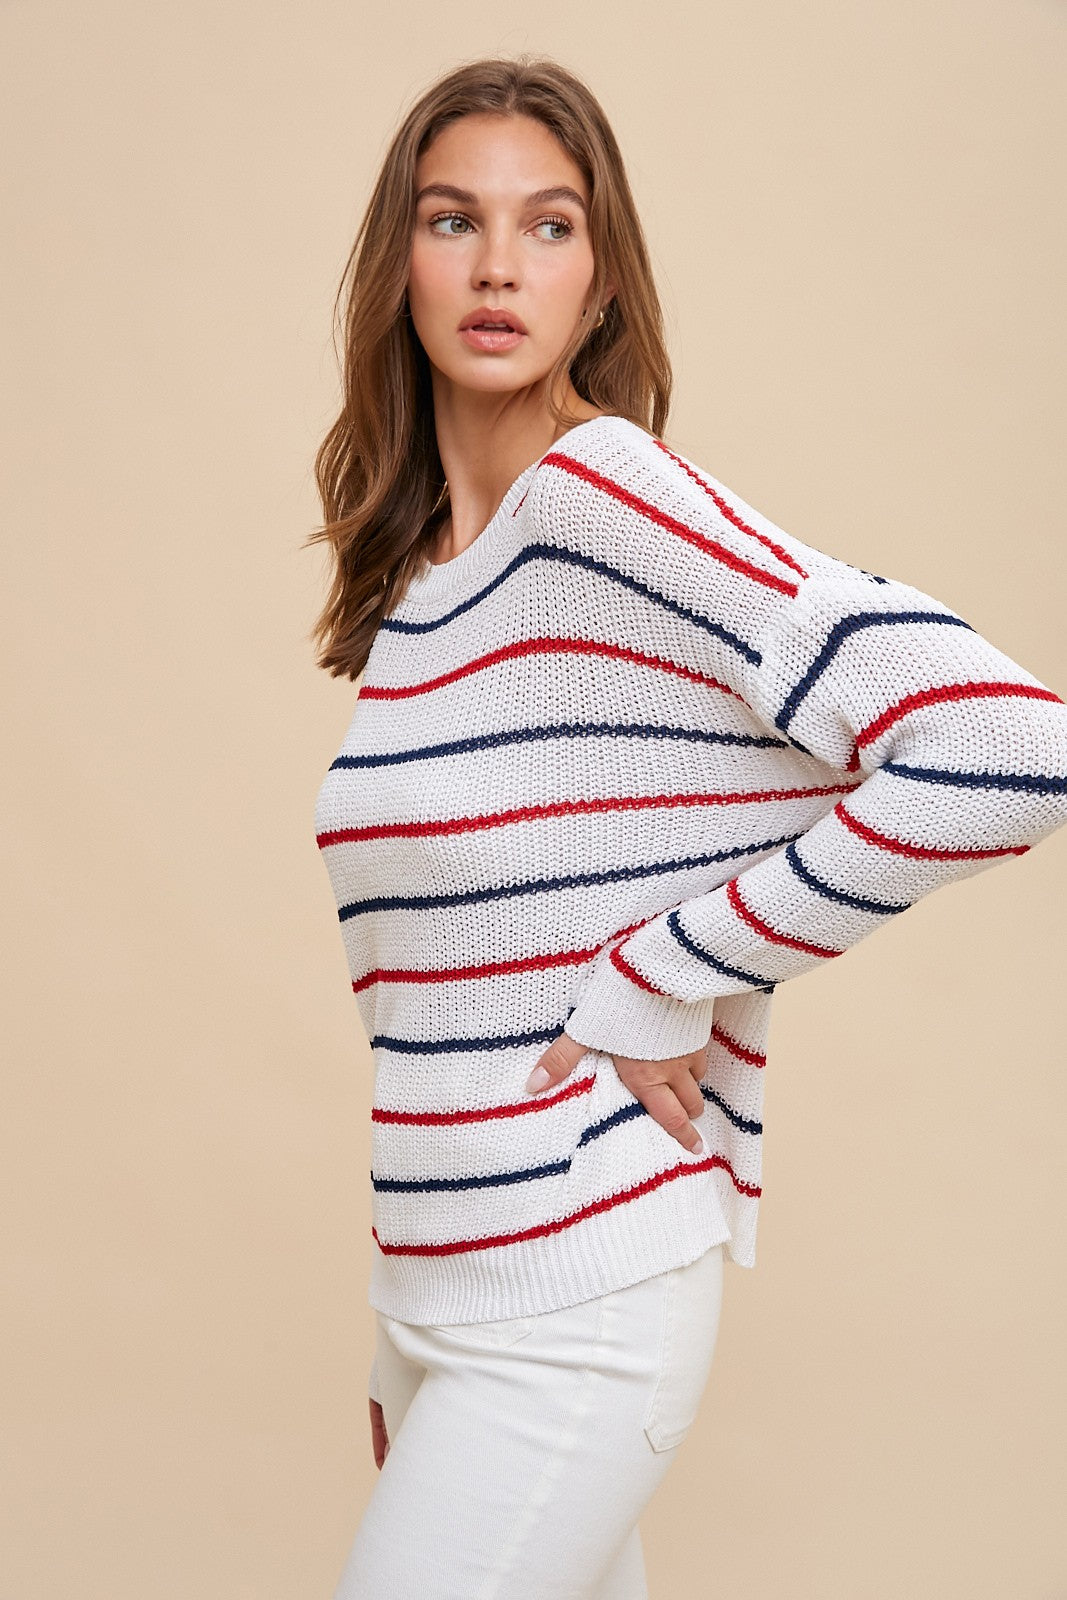 ALL AMERICAN SUMMER SWEATER